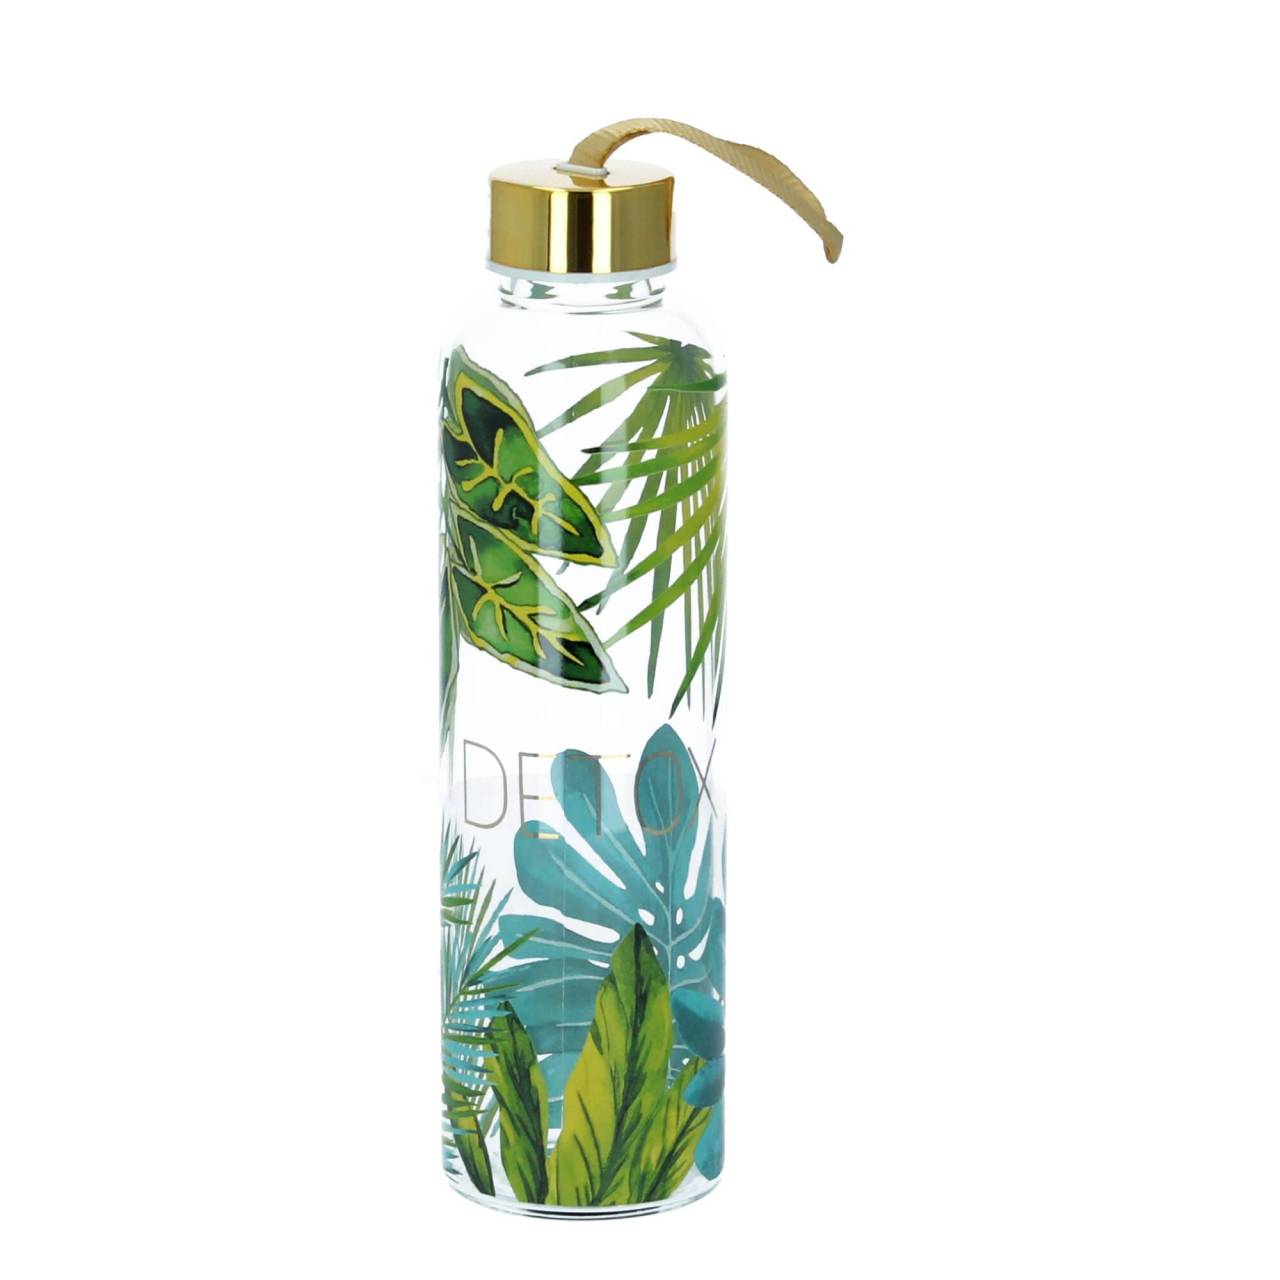 PPD Trinkflasche Glasflasche jungle real gold 550 ml